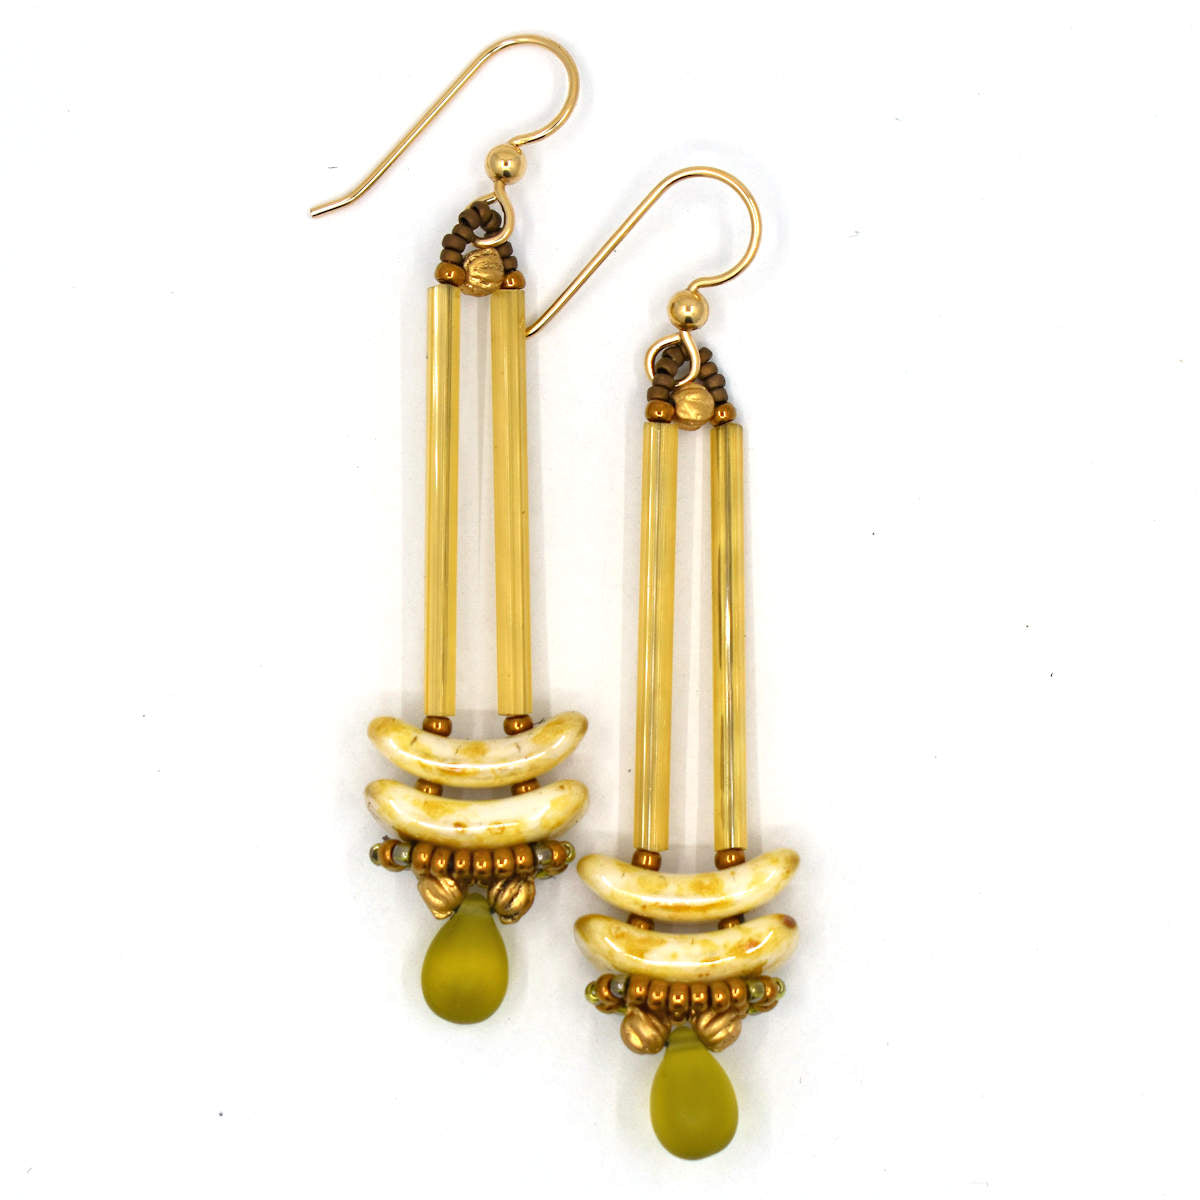 Earrings that look similar to a medicine dropper lay on a white background. There are two long, yellow-gold beads forming narrow vertical columns ending at the top of two speckled cream stacked arc shaped beads. At the bottom is a matte transparent olive green drop shaped bead, surrounded by a belt of gold seed beads.